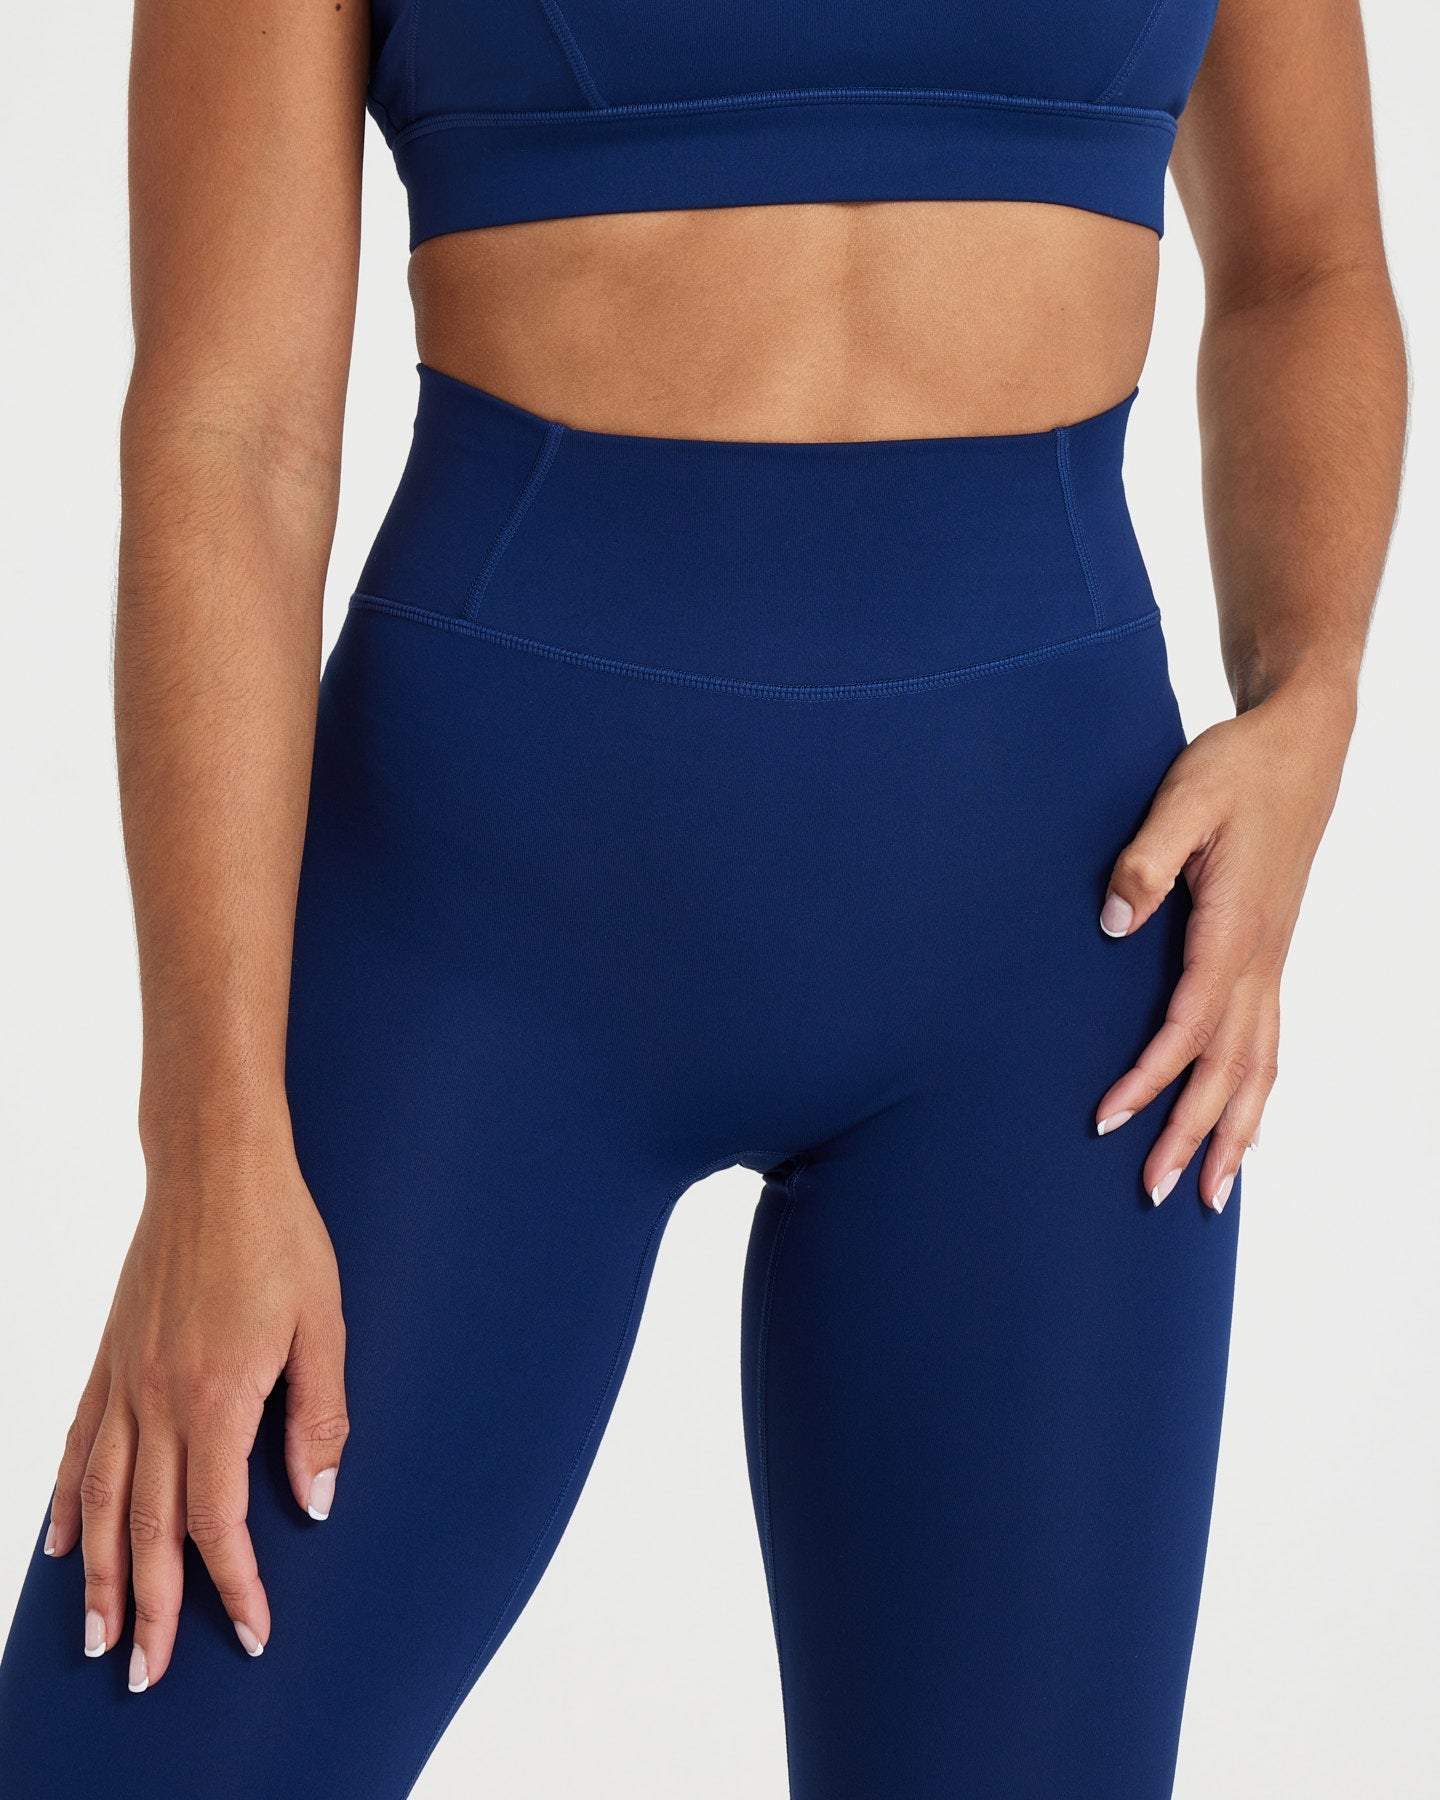 Women's Leggings with ultimate Glute Separation | Oner Active US